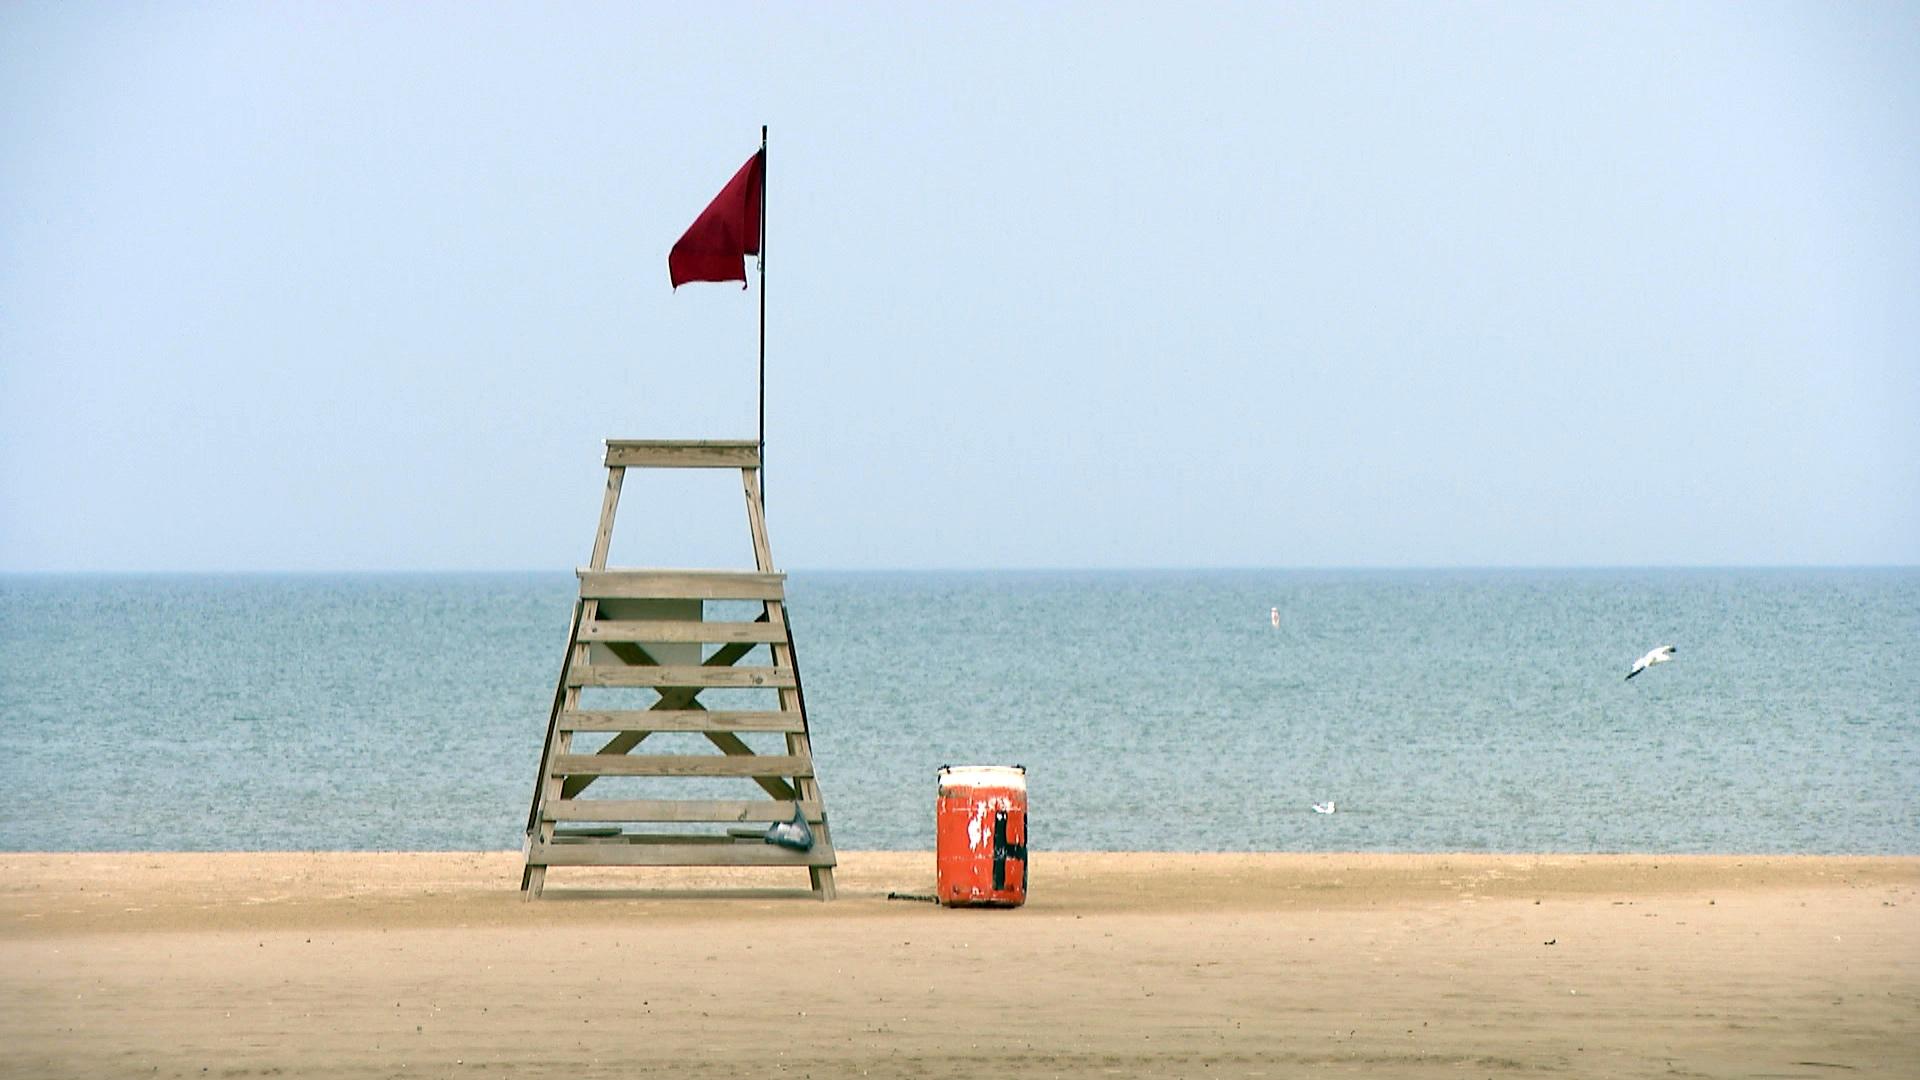 Red flags will be flown at Chicago beaches, indicating swimming is prohibited. (WTTW News)